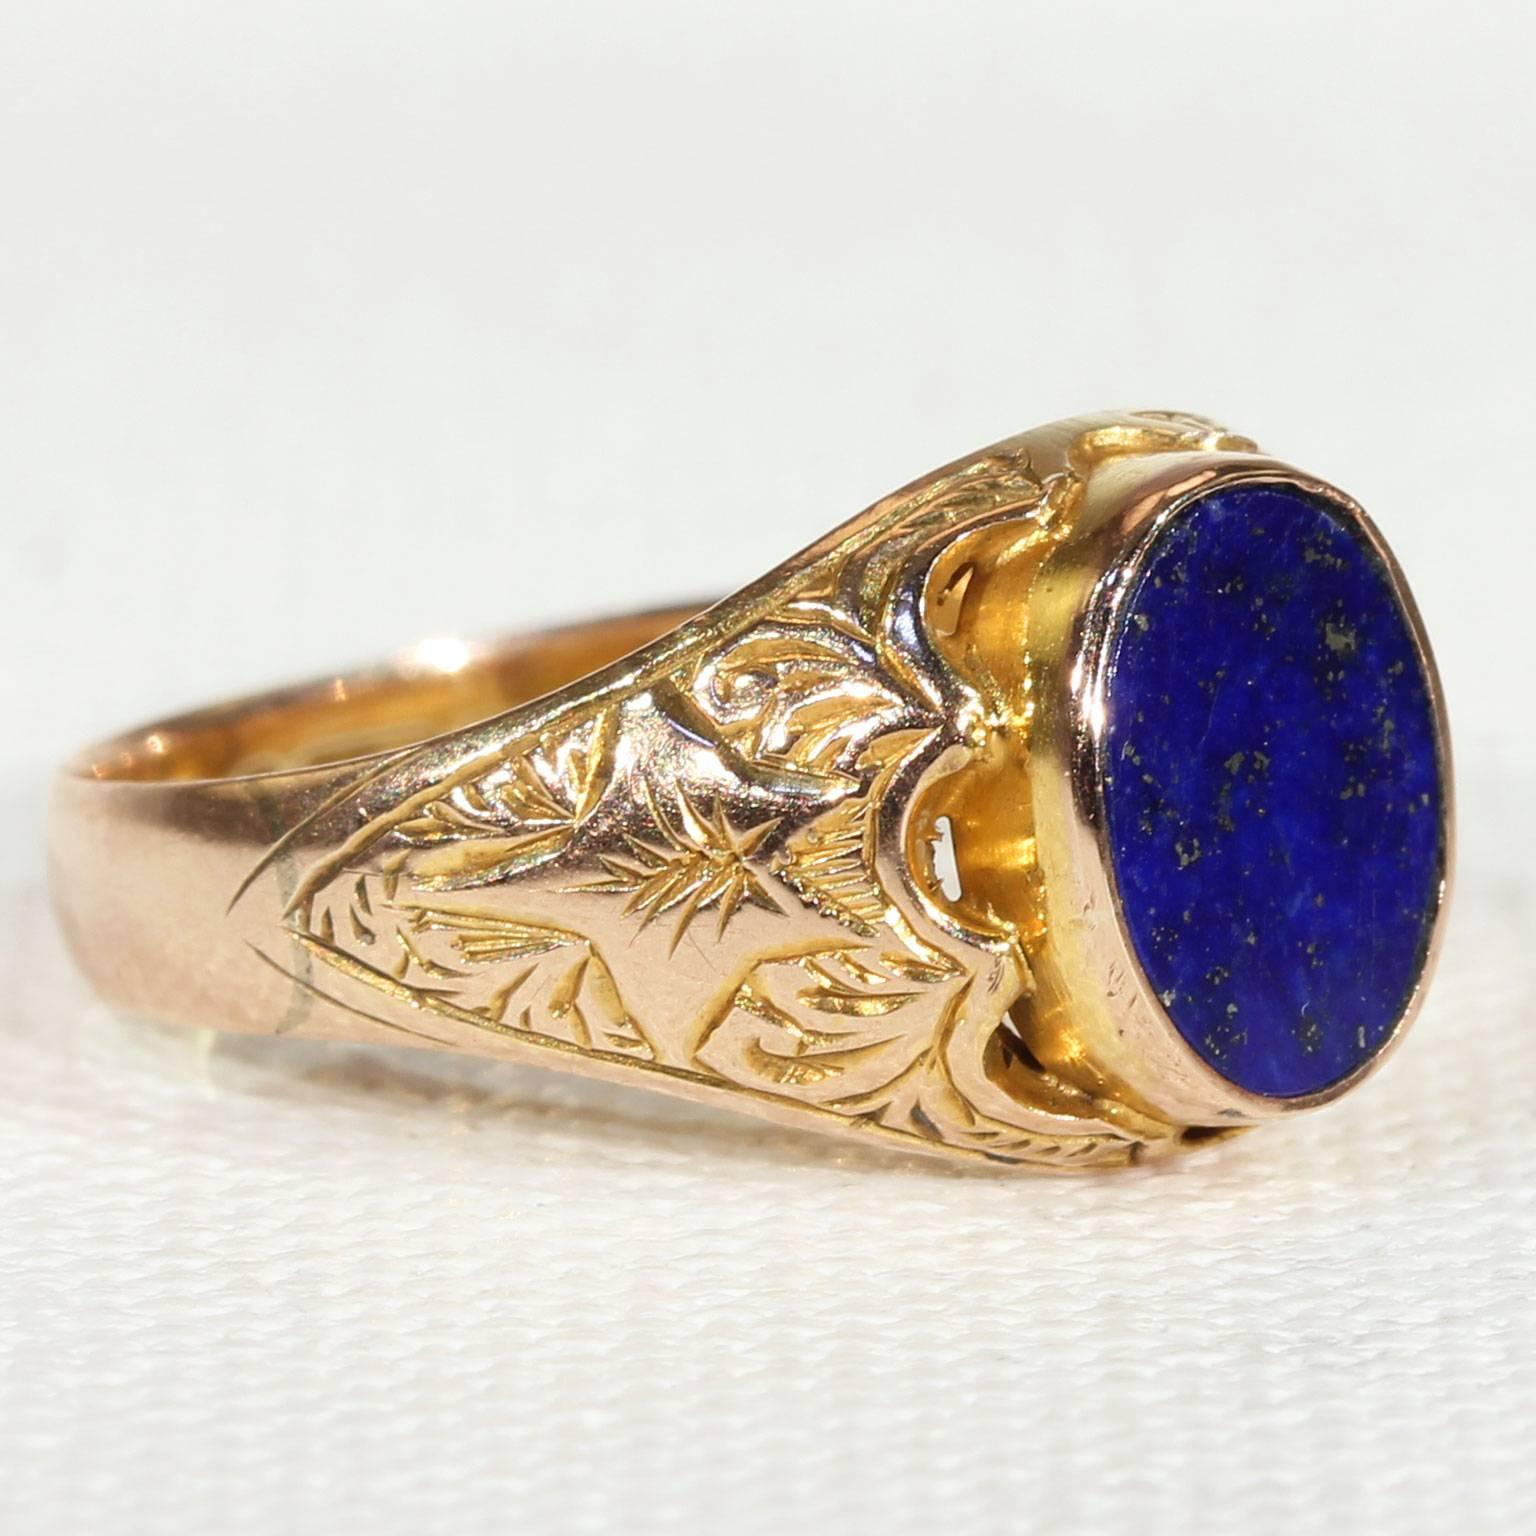 This wonderful antique Victorian lapis and gold ring was handcrafted in Chester, England, in 1896. A mesmerizing oval lapis stone is belcher set in the center of this ring, it measures 8.4 x 6.8 mm. The shoulders are smothered in beautiful floral